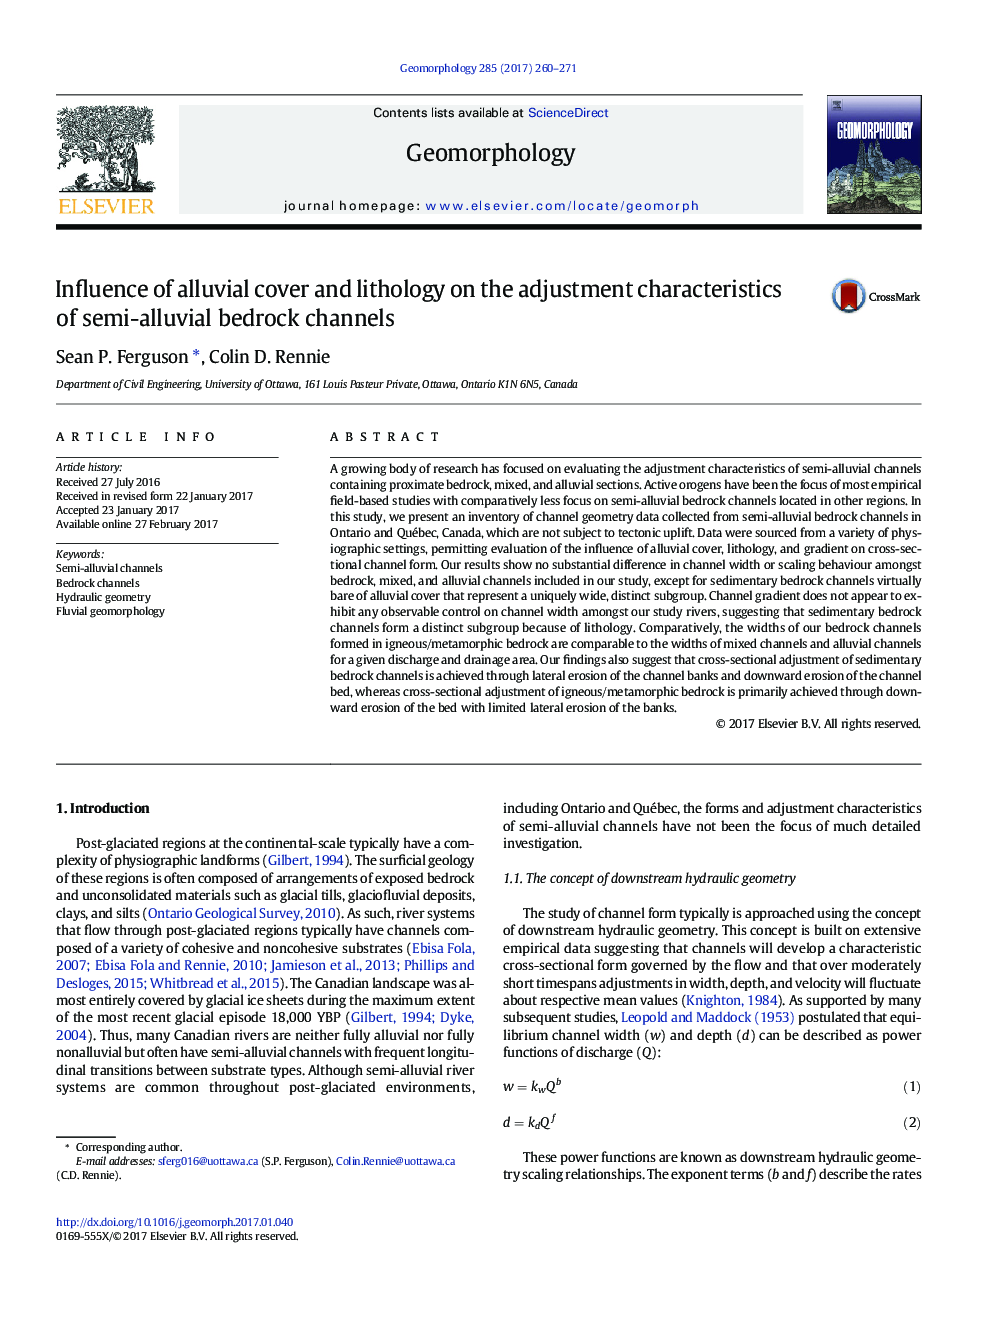 Influence of alluvial cover and lithology on the adjustment characteristics of semi-alluvial bedrock channels